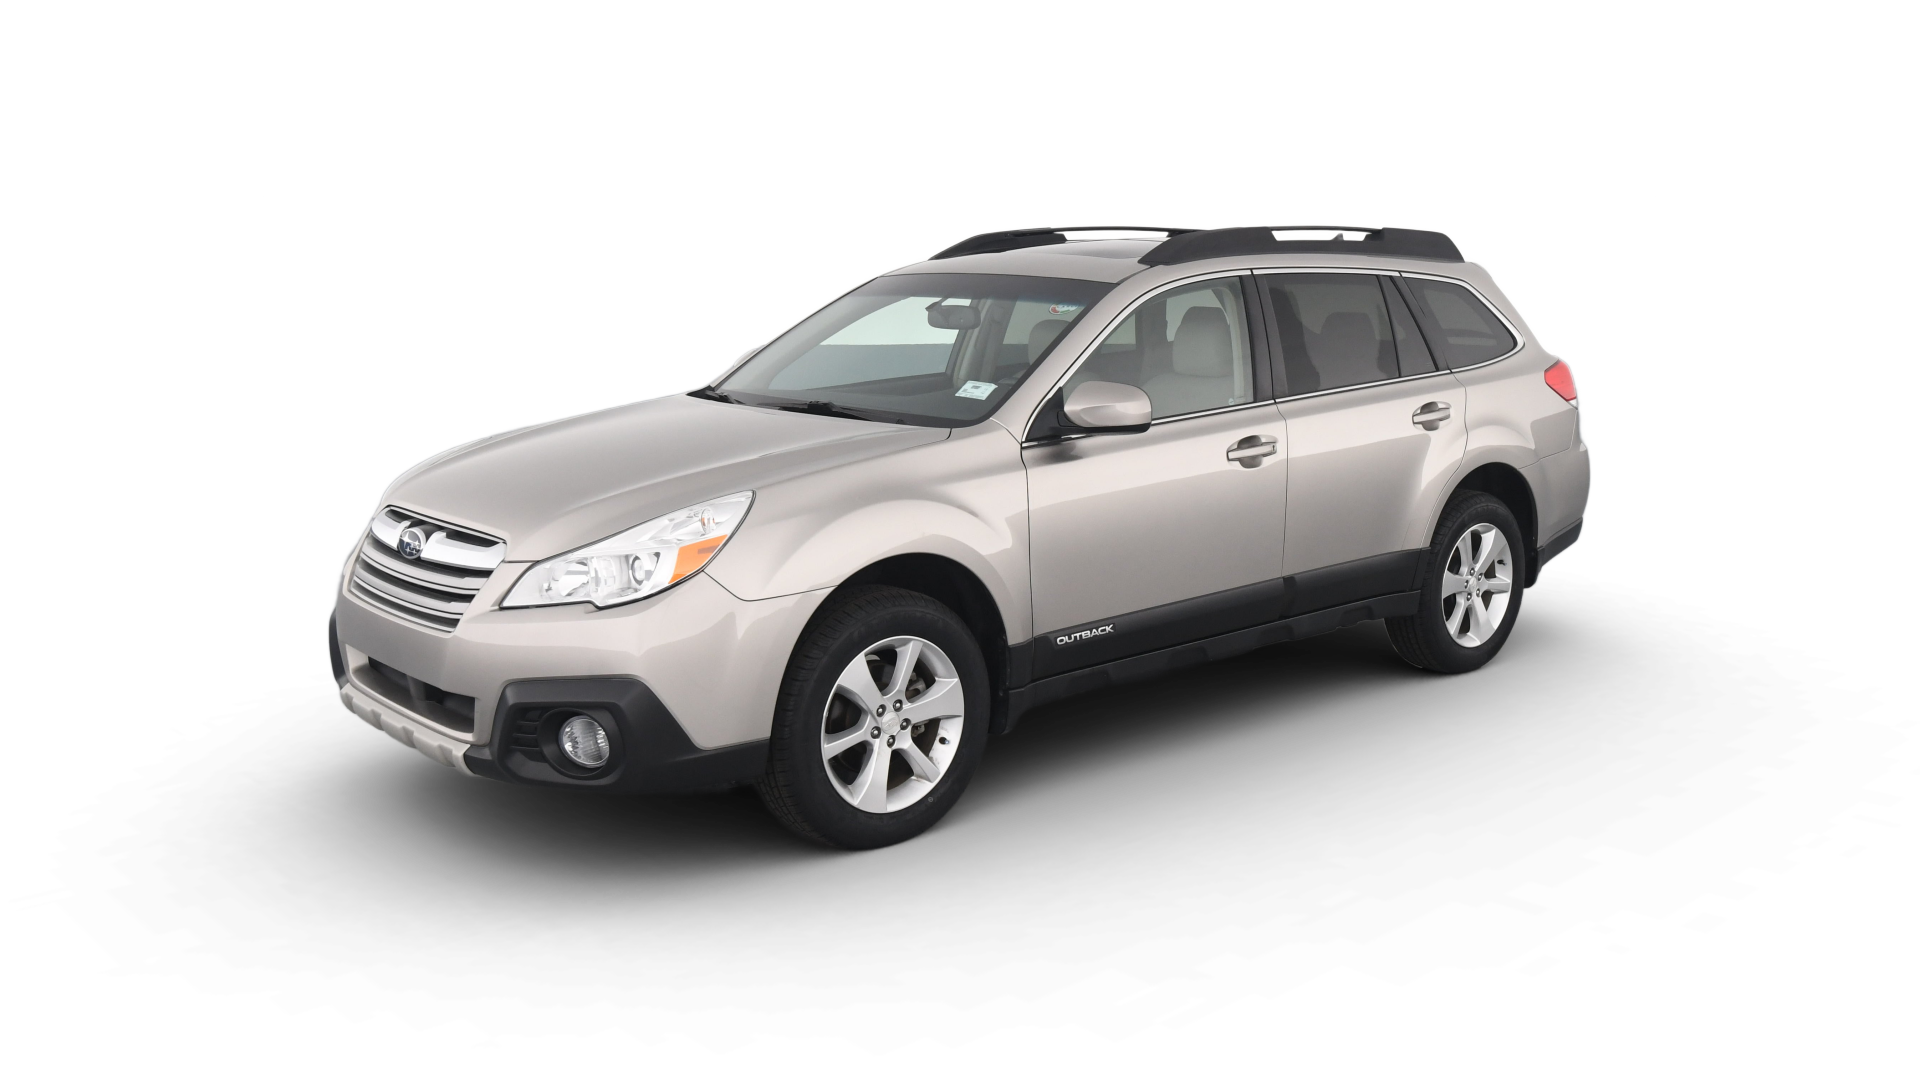 Used Subaru Outback 2.5i Limited For Sale Online | Carvana